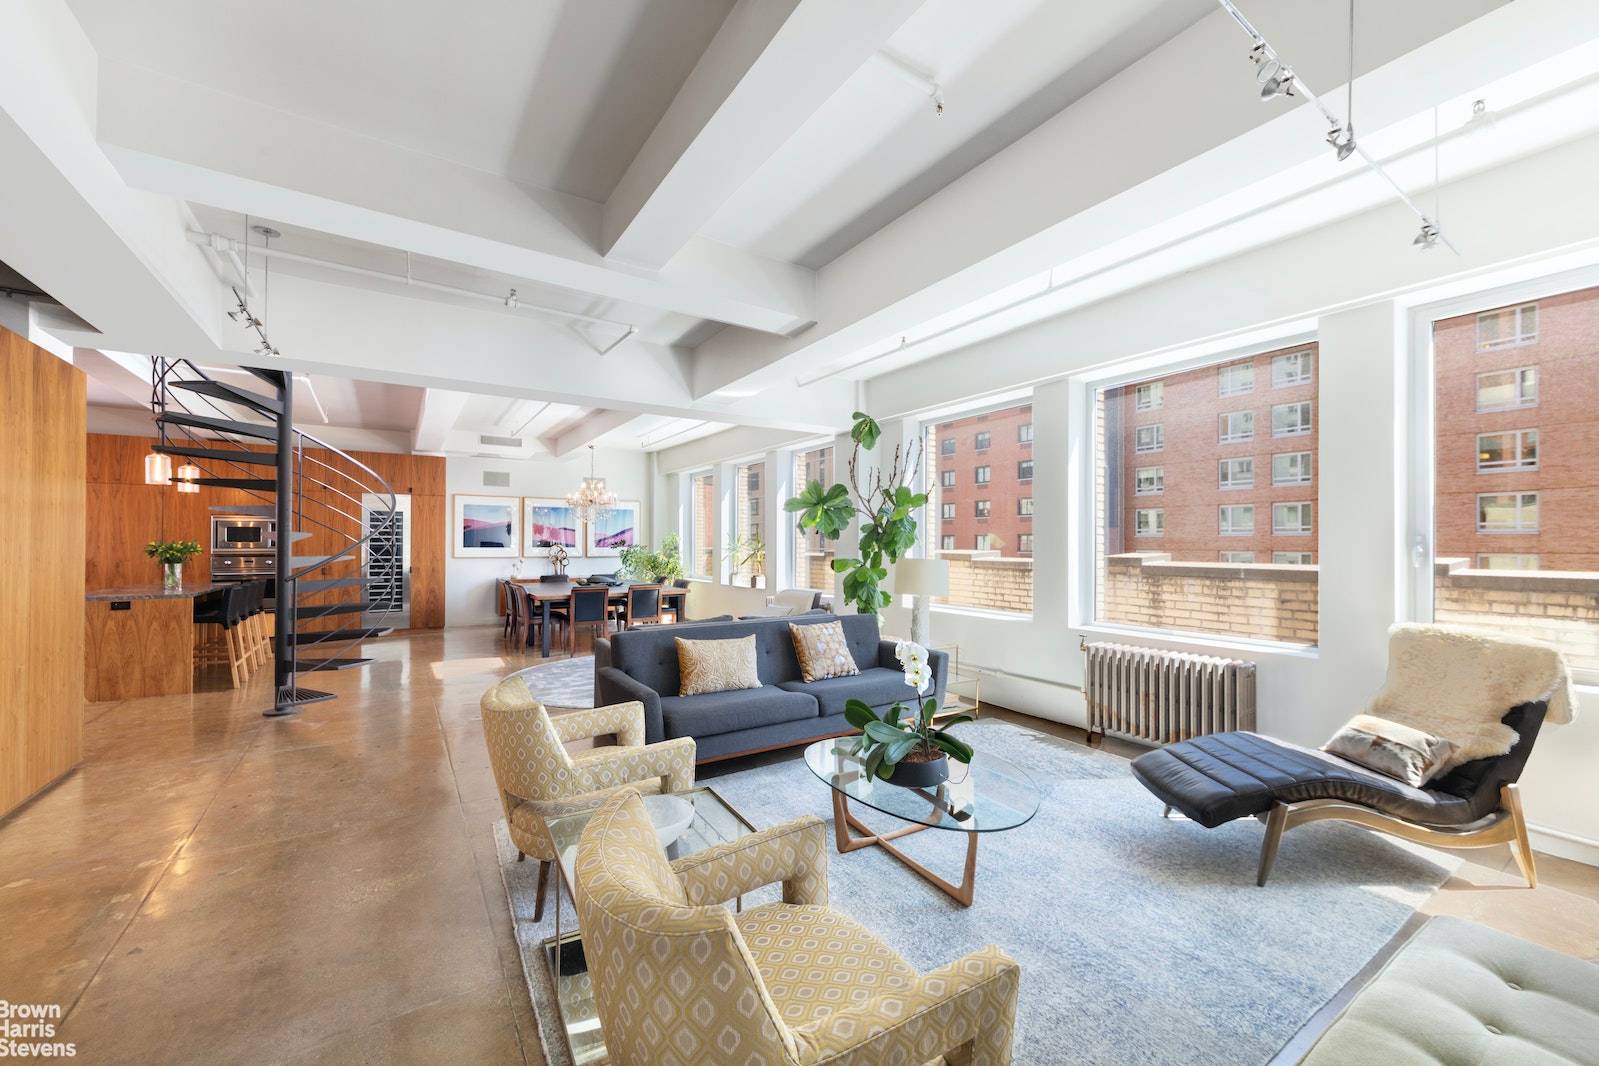 Experience the epitome of luxury living in this exceptional penthouse loft perched atop a magnificent Art Deco building in the coveted Hudson Yards neighborhood.